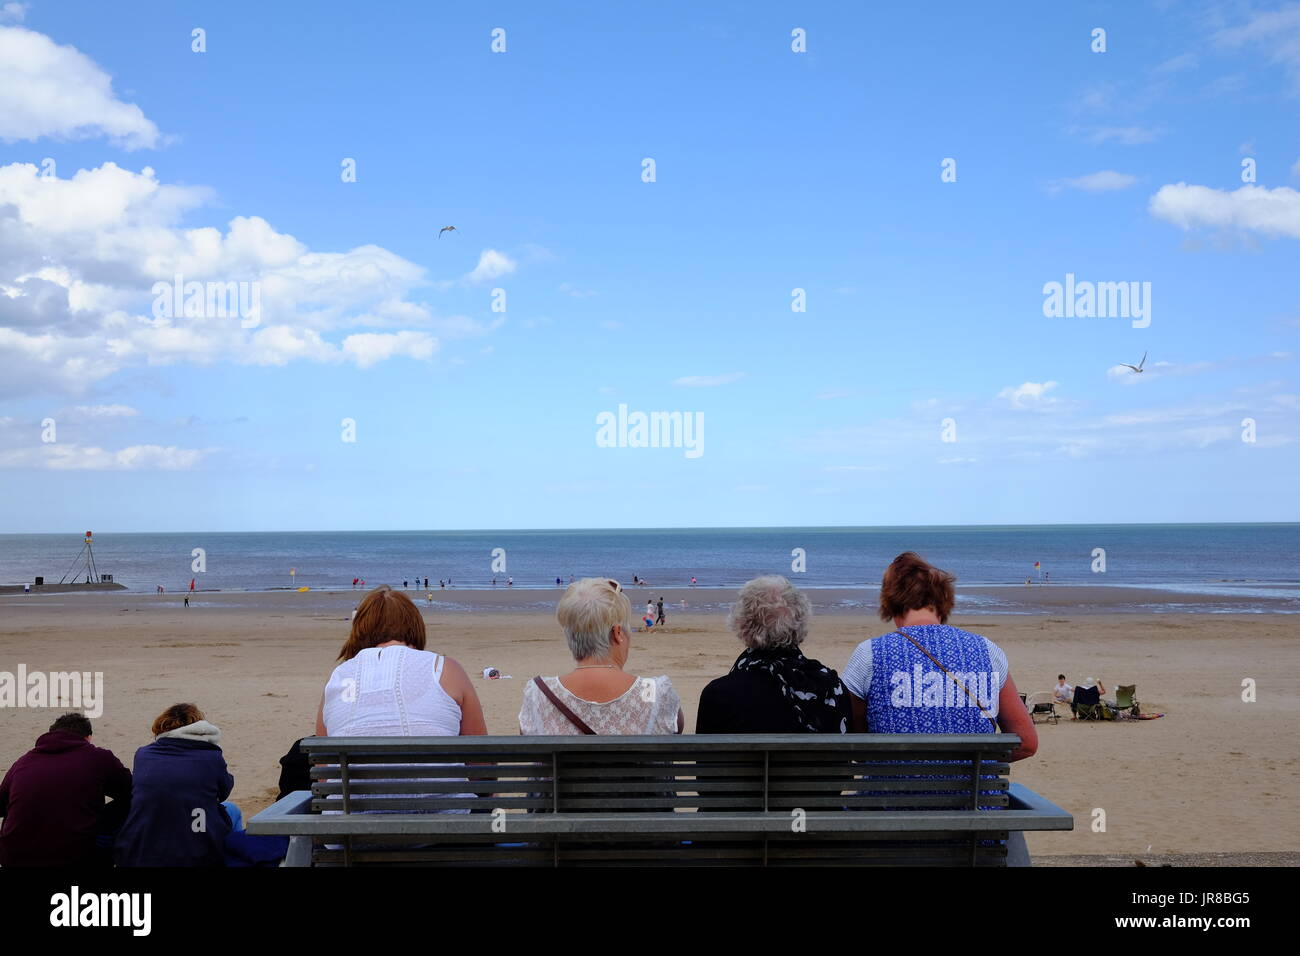 Four ladies stop to relax on a bench on the seafront promenade at Mablethorpe in Lincolnshire on their summer holidays. Stock Photo